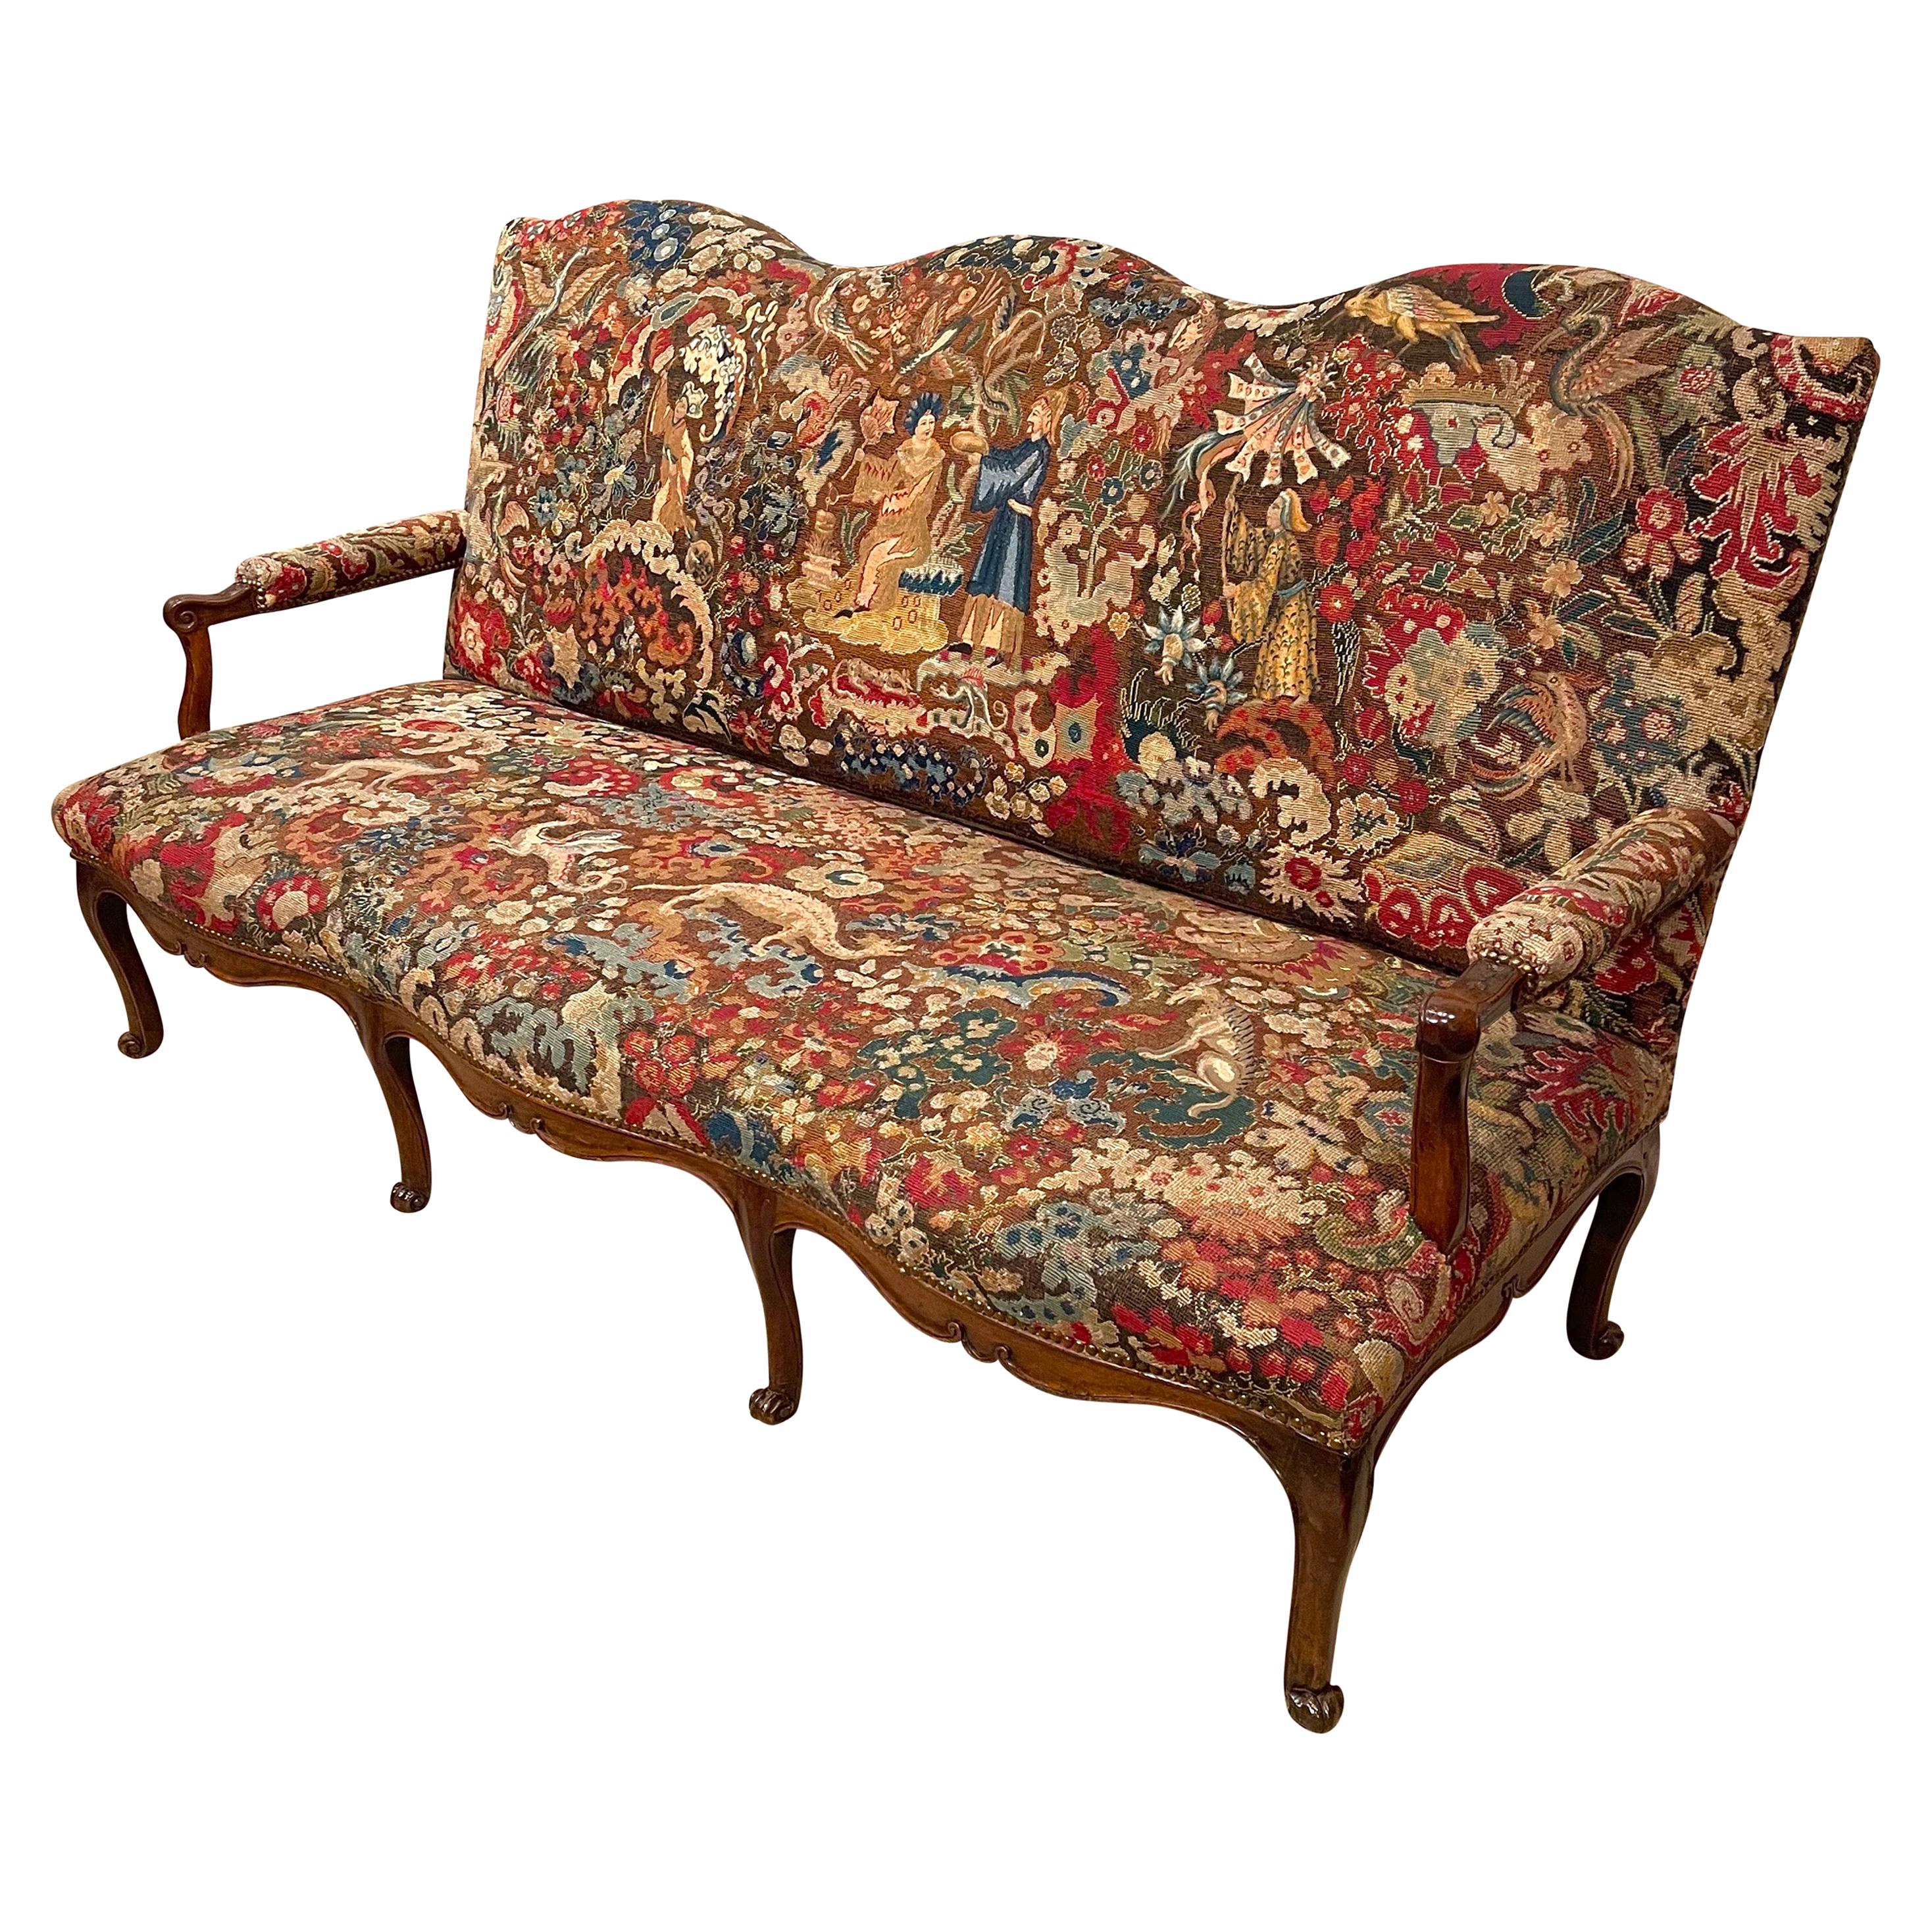 Régence Period Needlepoint Covered Settee